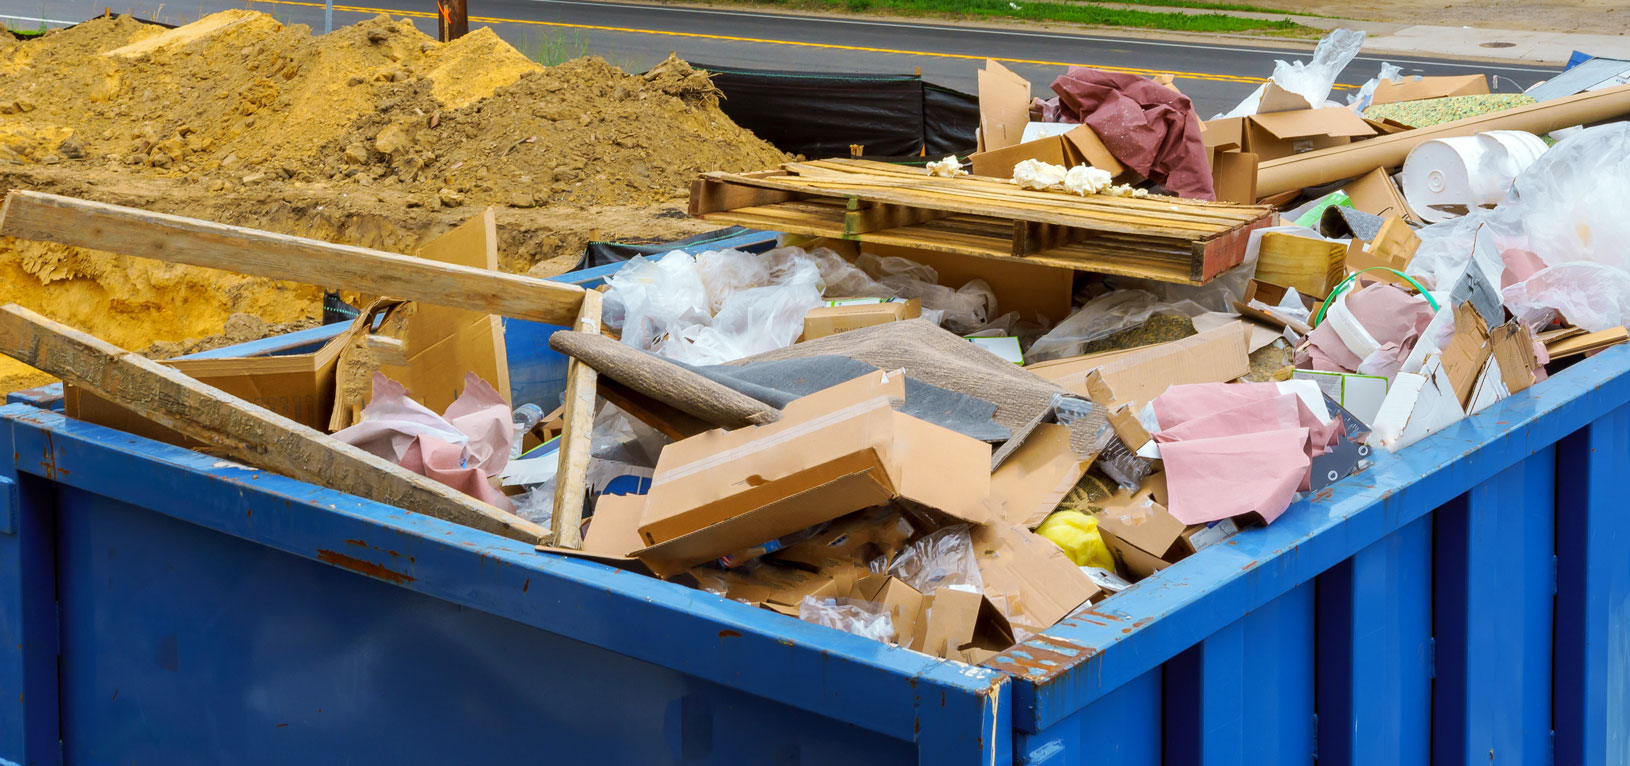 Riverside Junk Removal, Junk Removal Services and Junk Removal Company